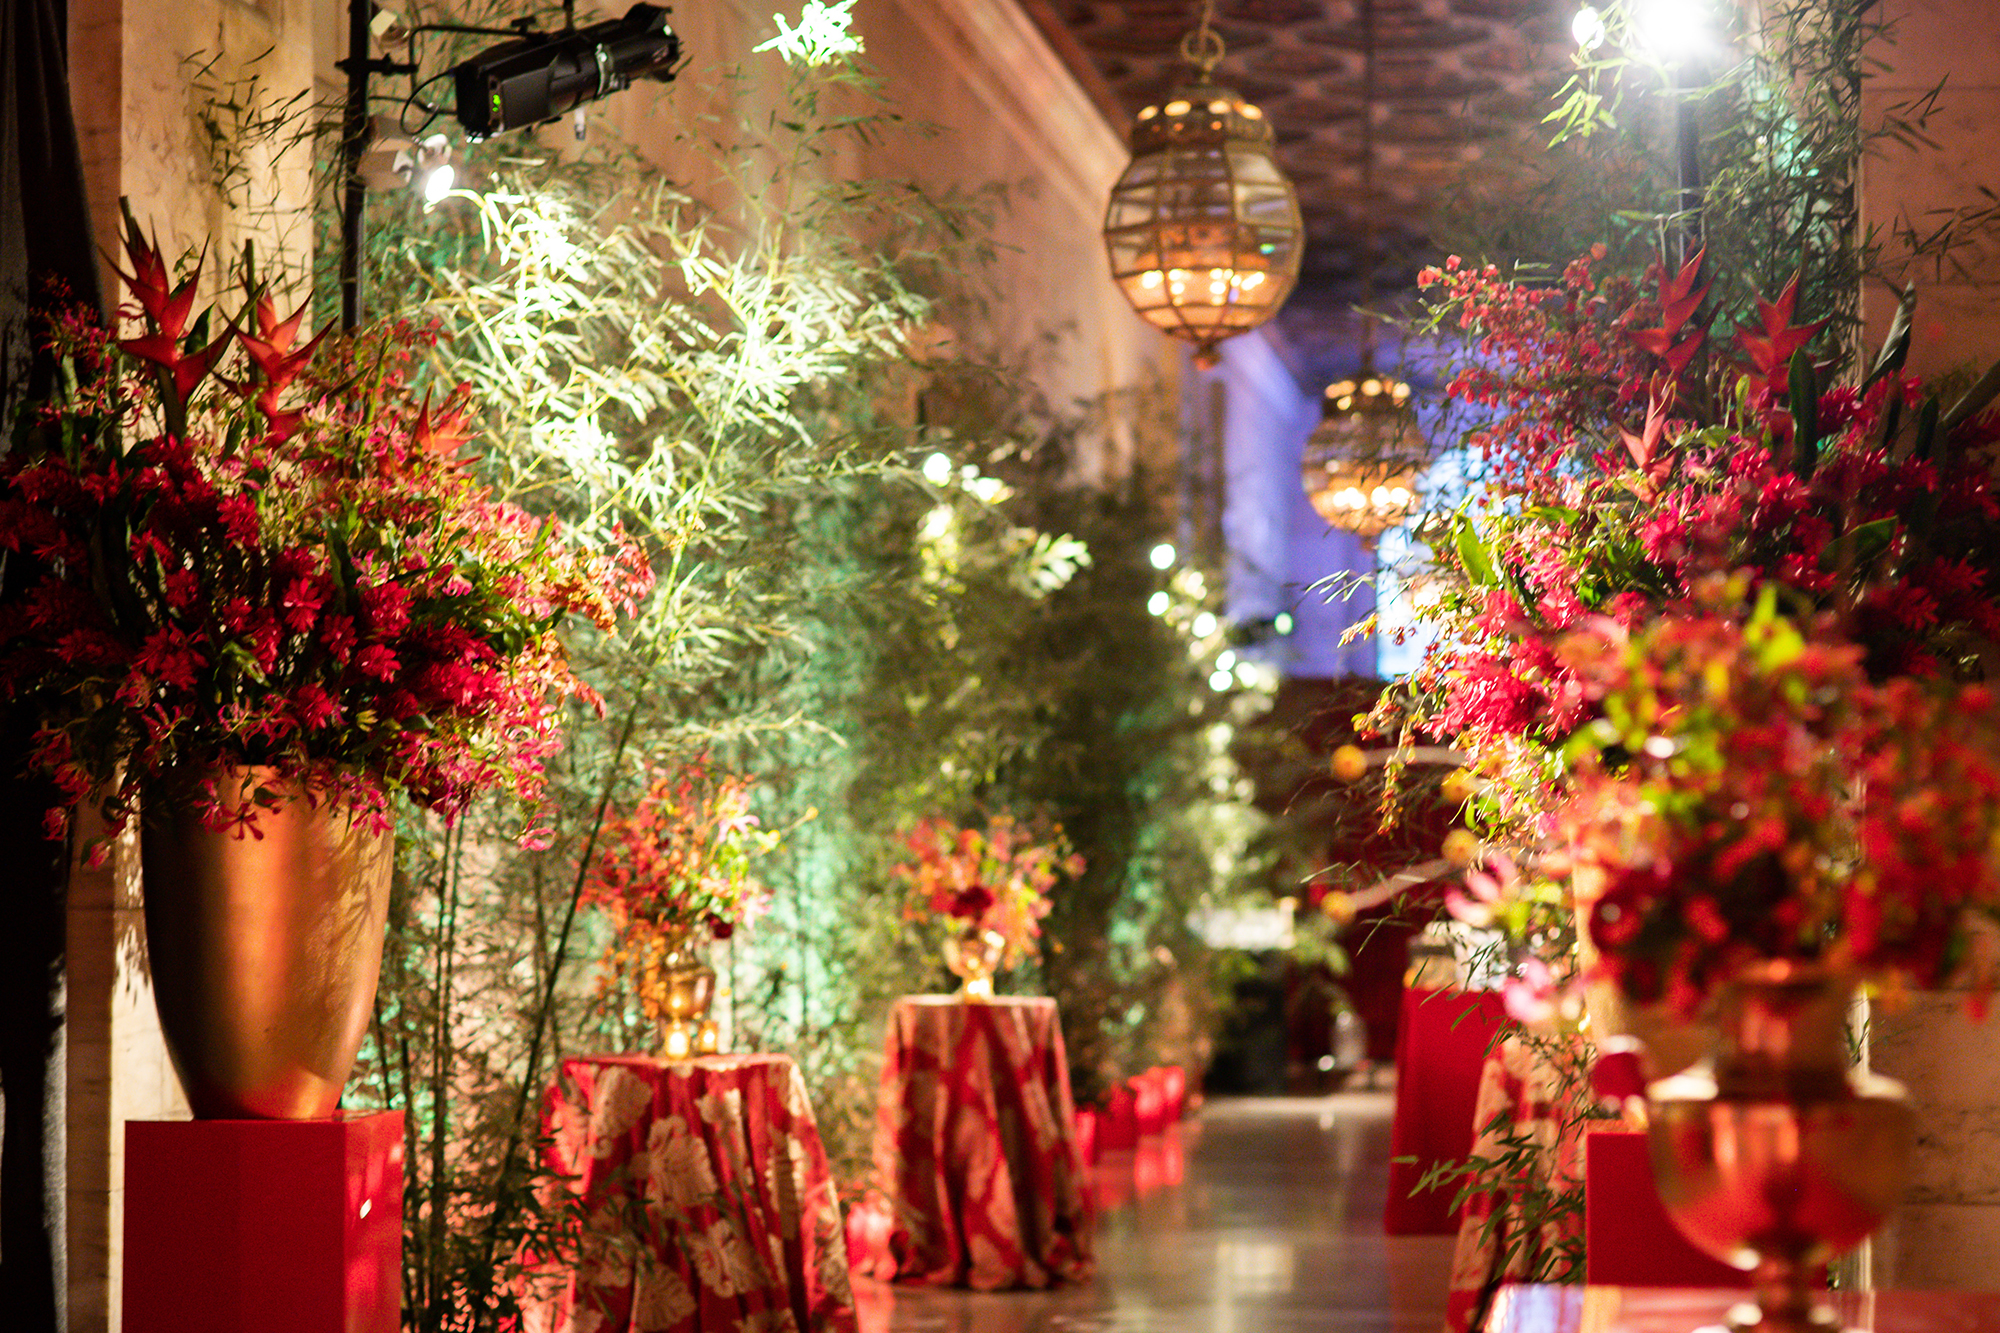 THE KNOT GALA - NEW YORK PUBLIC LIBRARY - CHANDELIER EVENTS